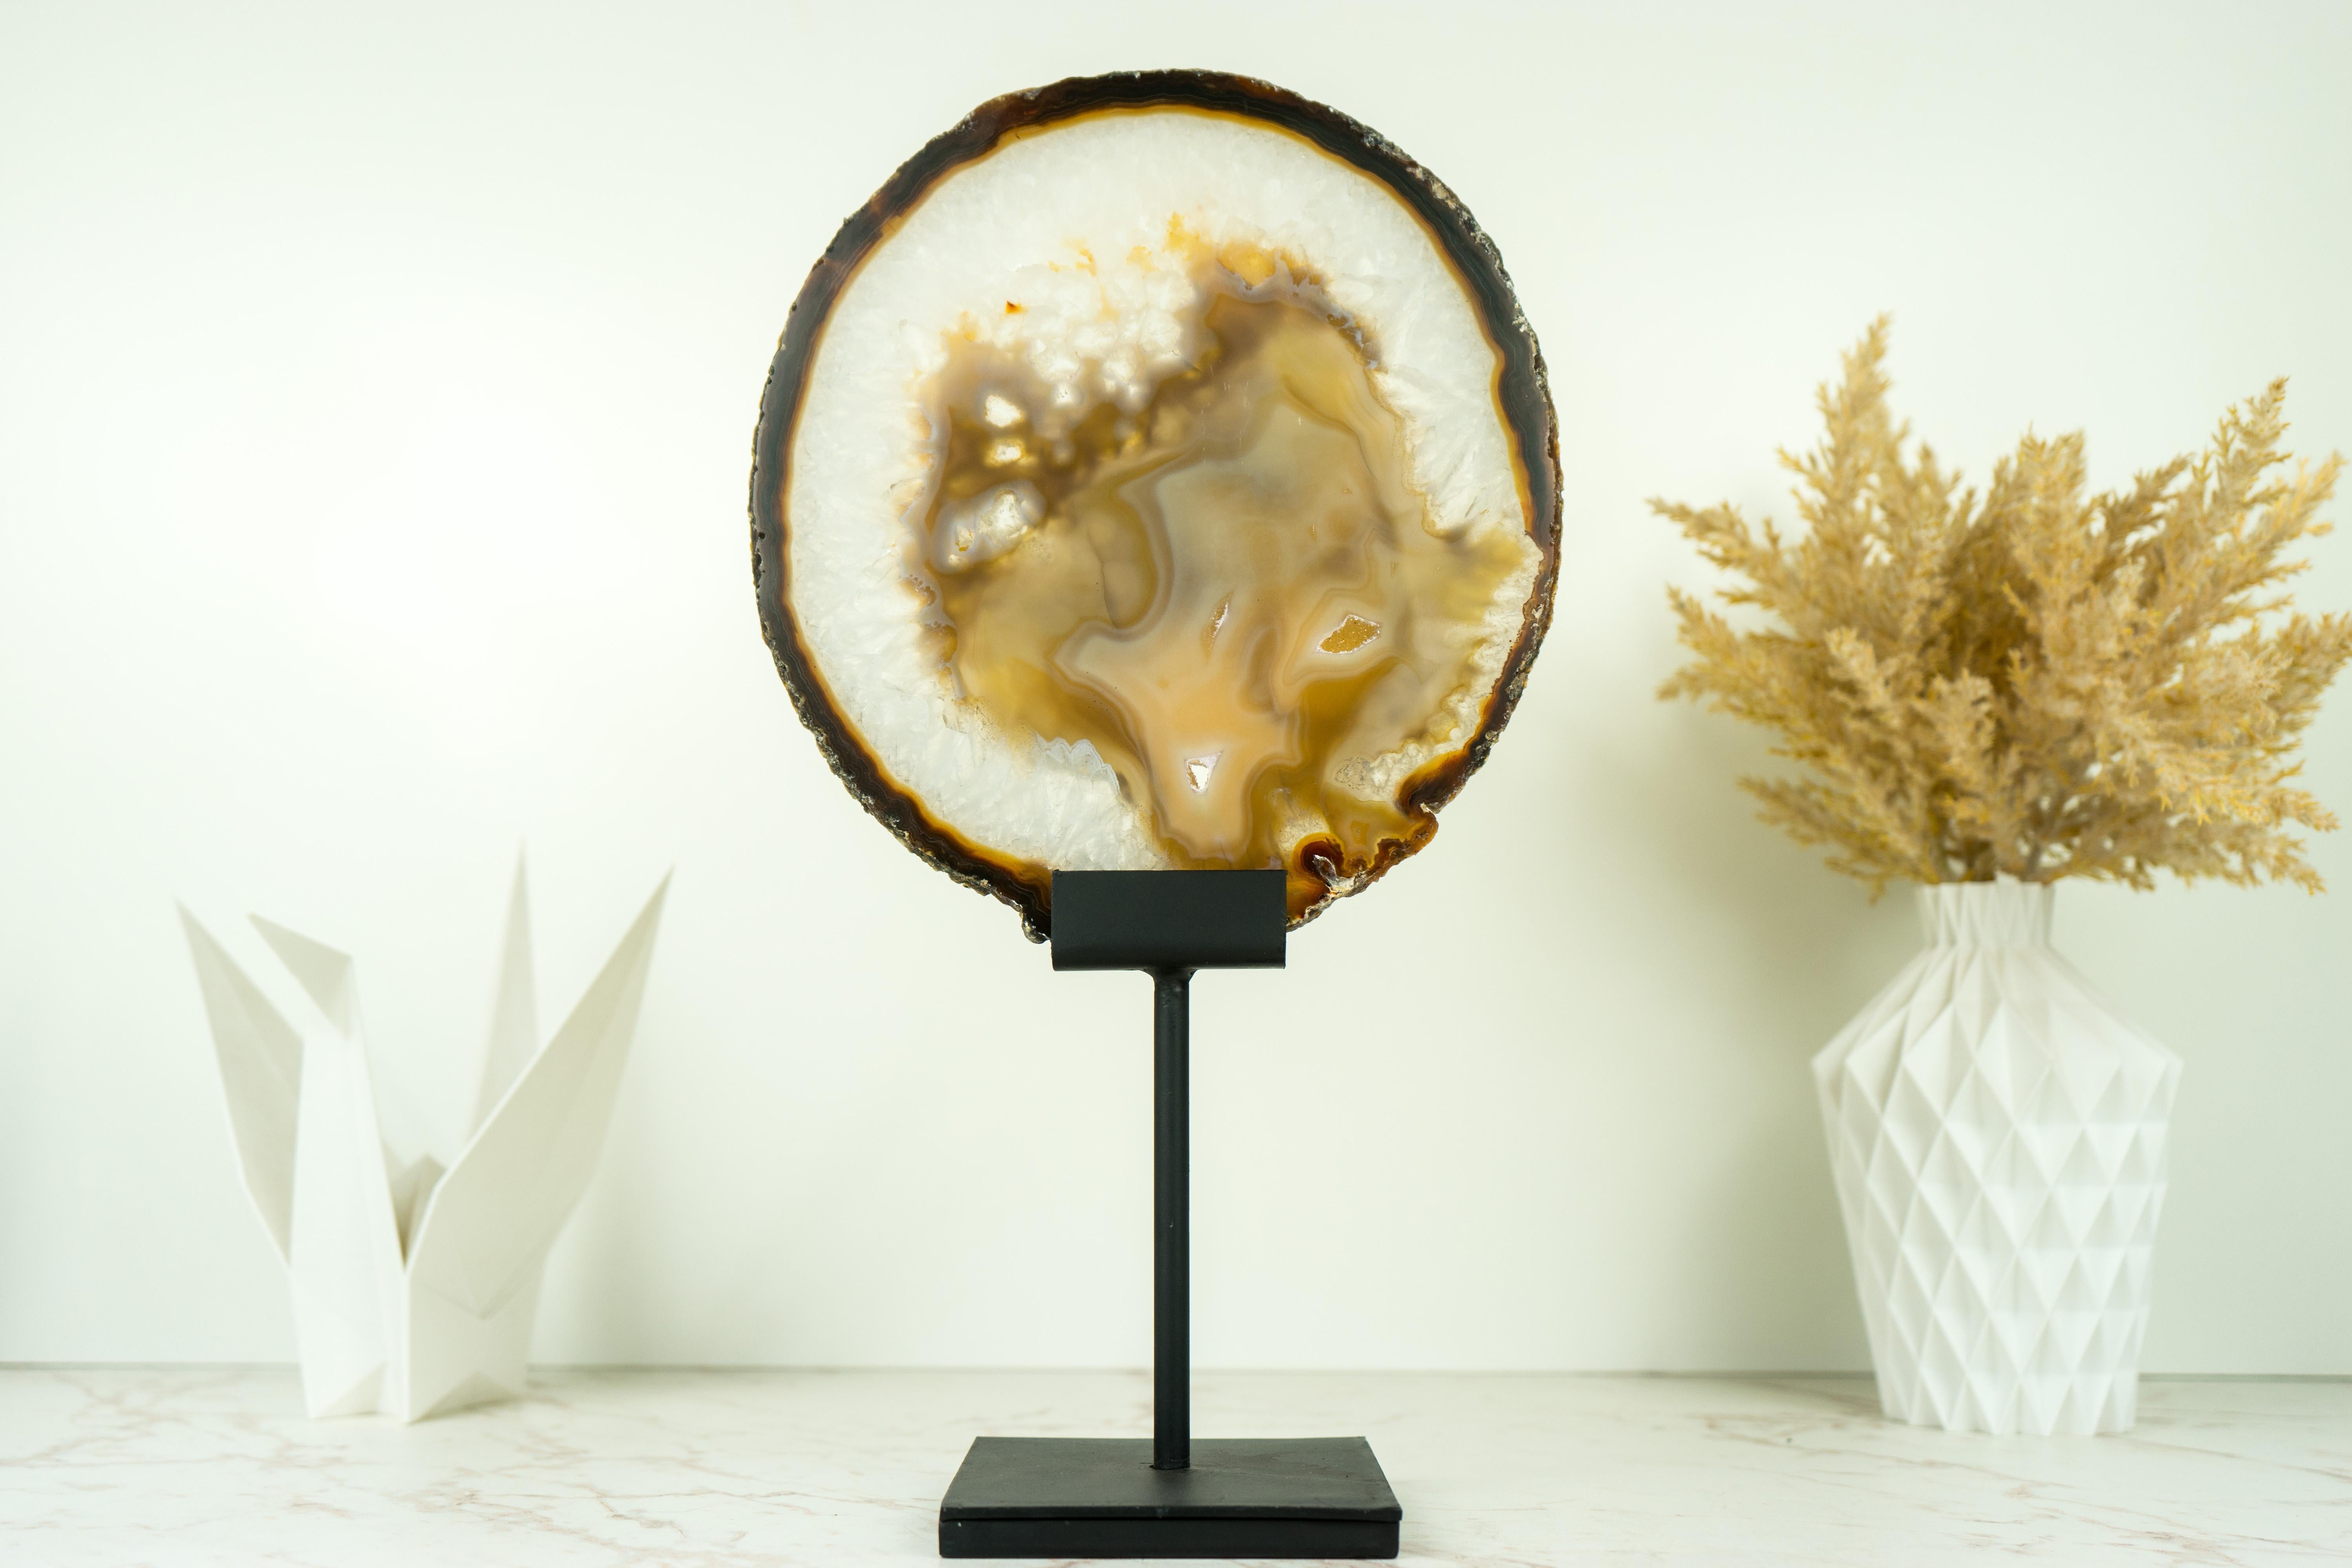 An agate slice to be admired, this agate slice highlights an aesthetic drawing that resembles a Nebula forming inside a Crystal universe. Harmonious, rare, and with many highlights, this agate slice is ready to become both the centerpiece of your